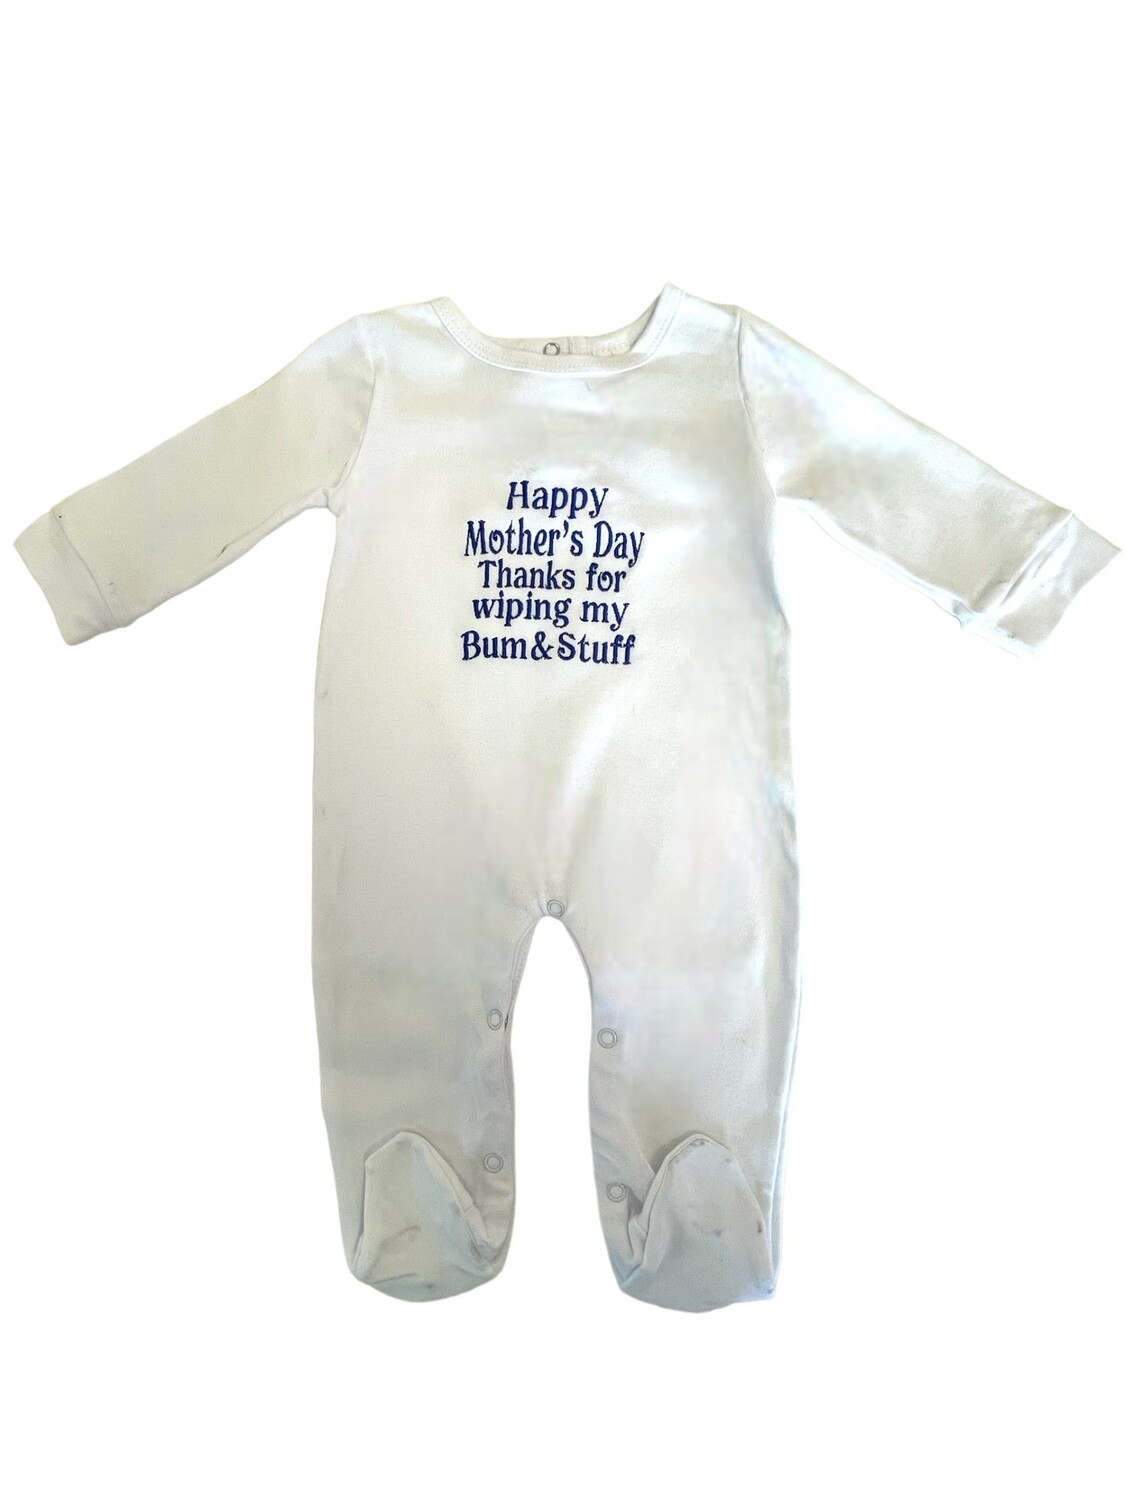 Personalised White Cotton Baby Grow